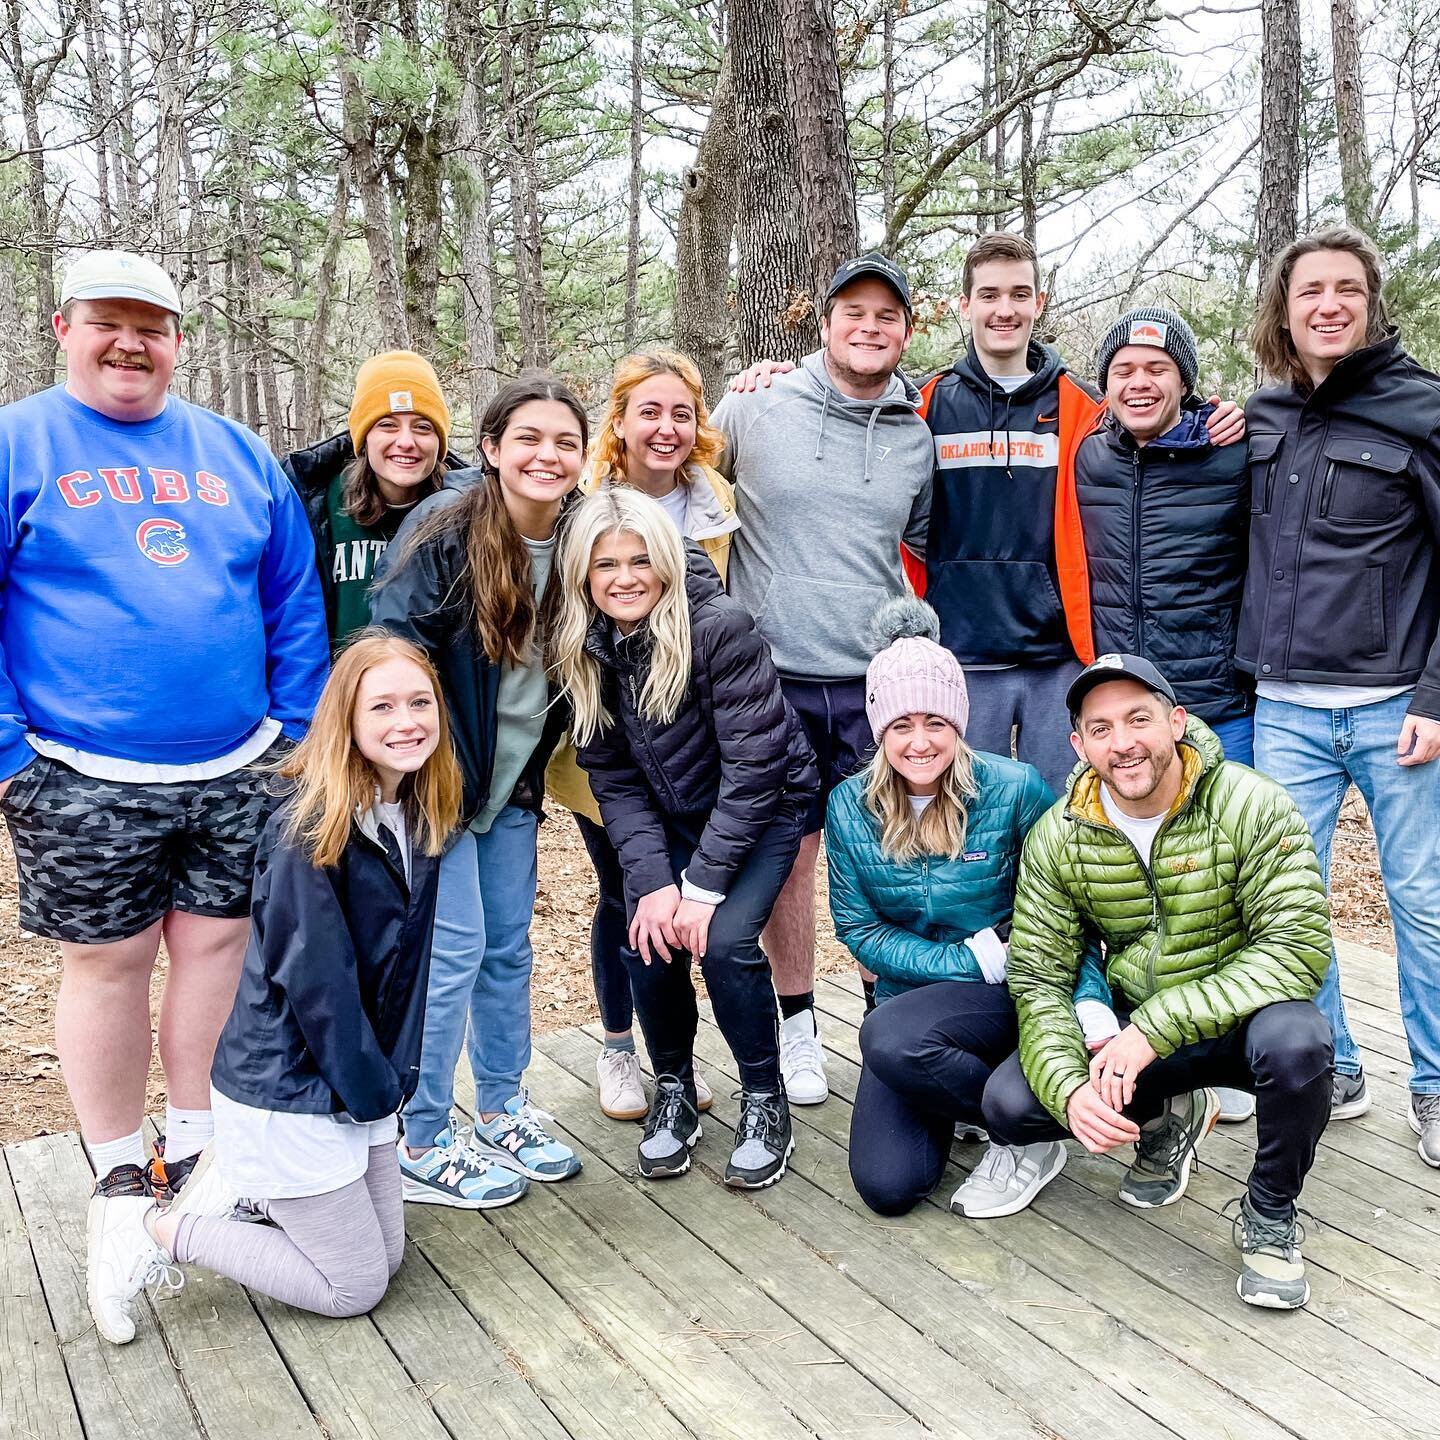 MANAGEMENT ☀️ RETREAT 
at Josh&rsquo;s we believe in putting our employees first to construct the best possible company culture. We have loved the weekend growing and developing as both a team and individuals this weekend to be the best crew for the 